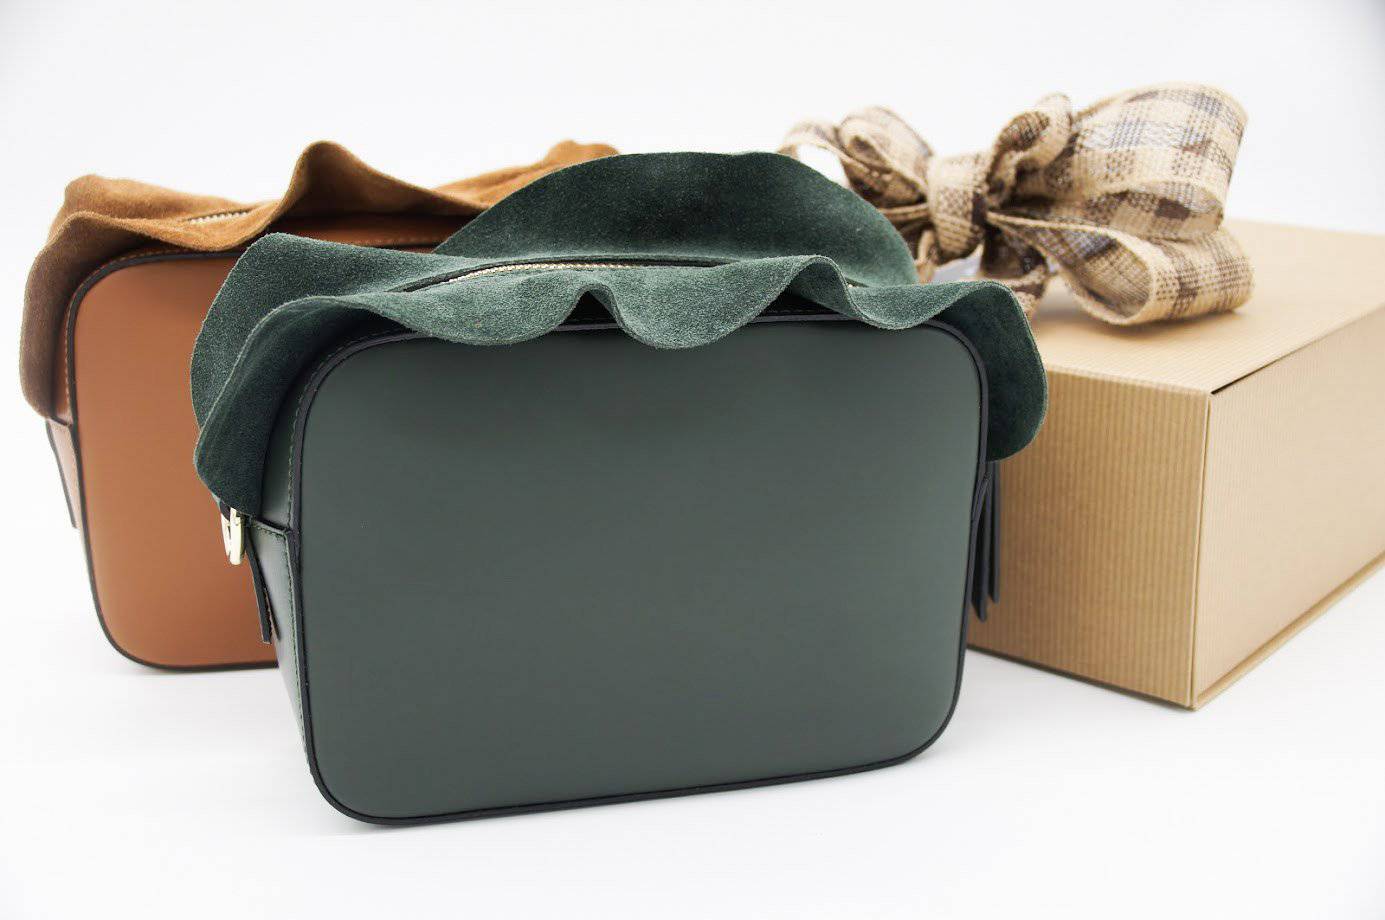 Italian Leather Shoulder bag - Benzie Gifts